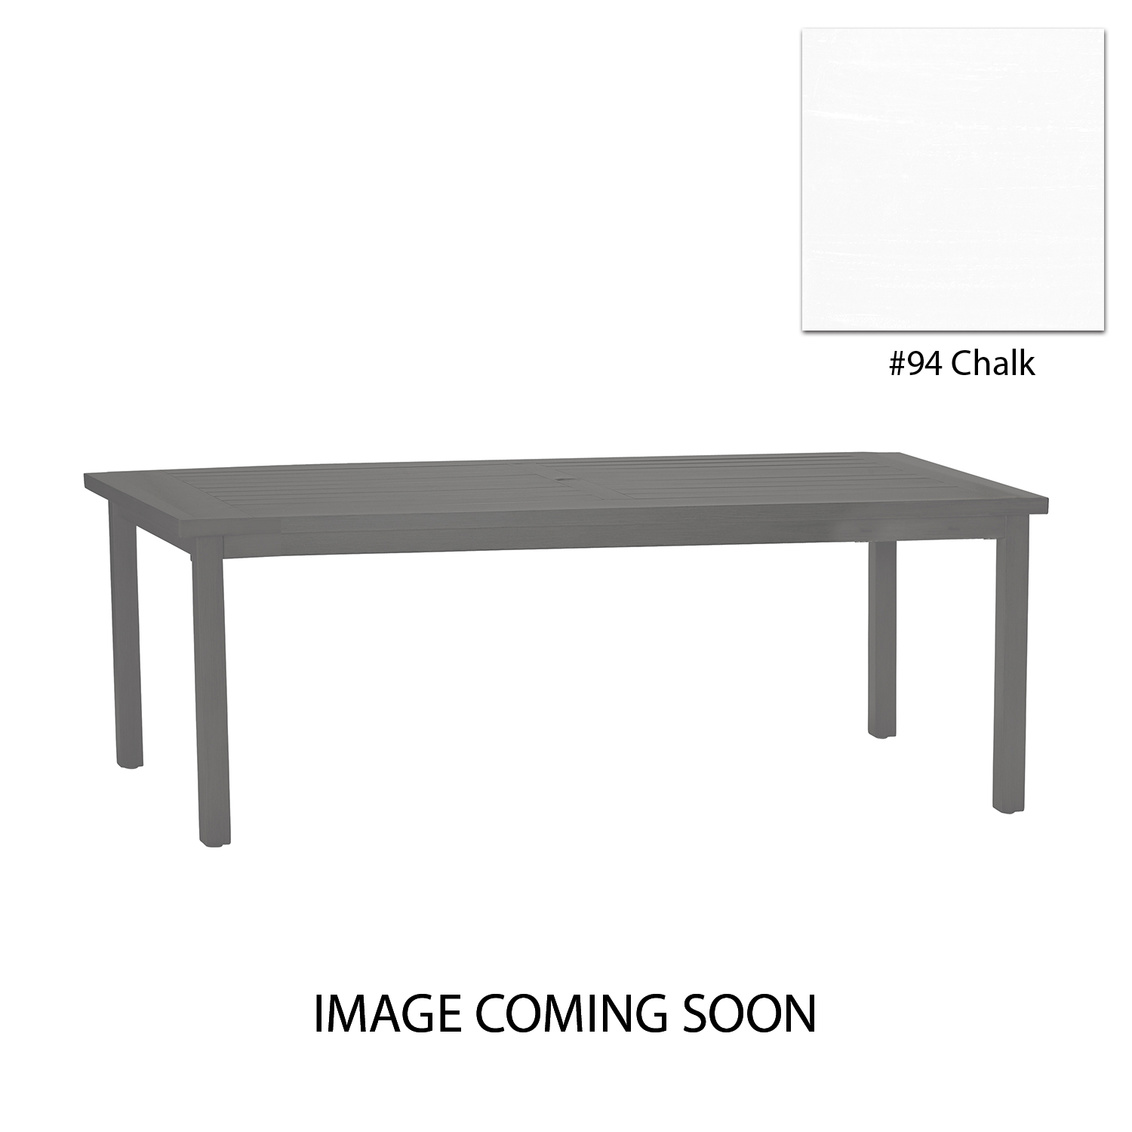 club aluminum rectangular dining table in chalk product image